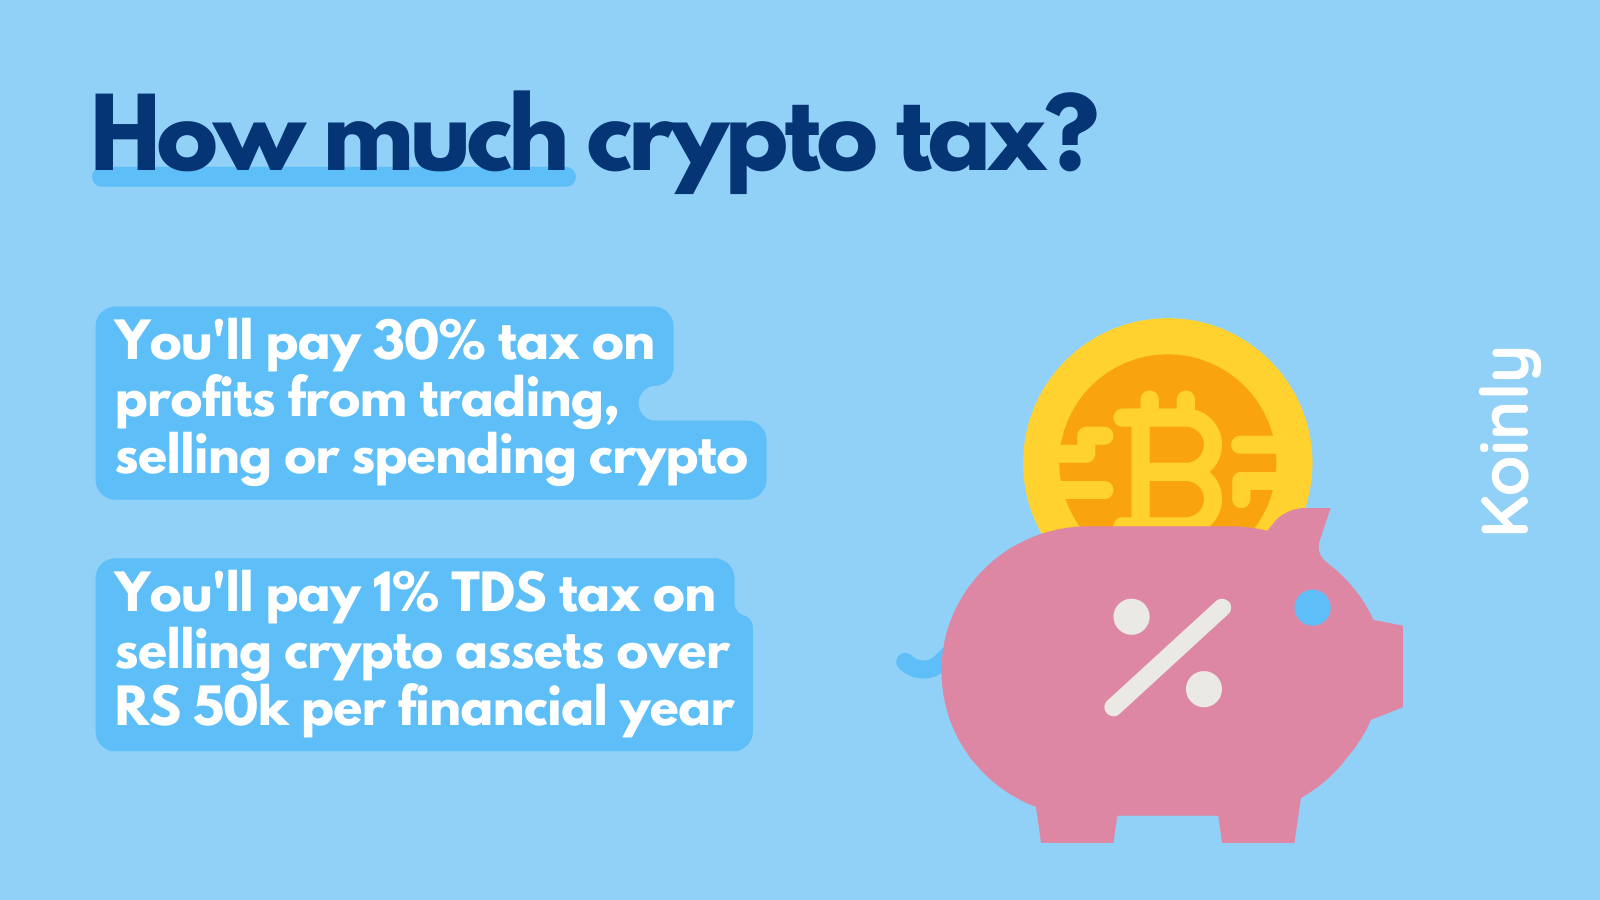 How much crypto tax will you pay in India